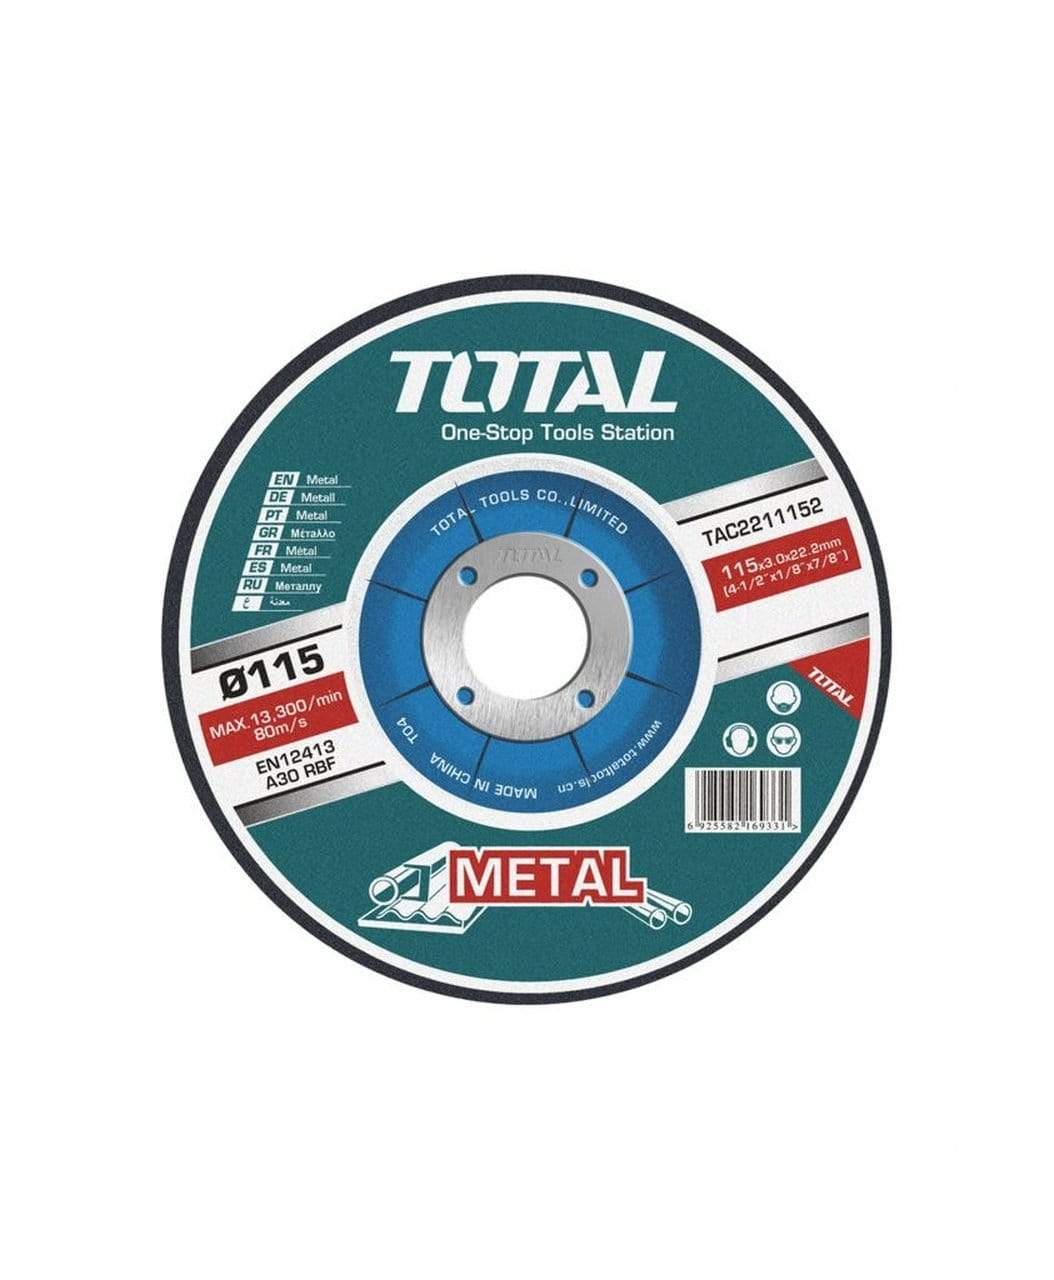 Total Abrasive Metal Cutting Disc, Depressed centre | Supply Master | Accra, Ghana Tools Building Steel Engineering Hardware tool